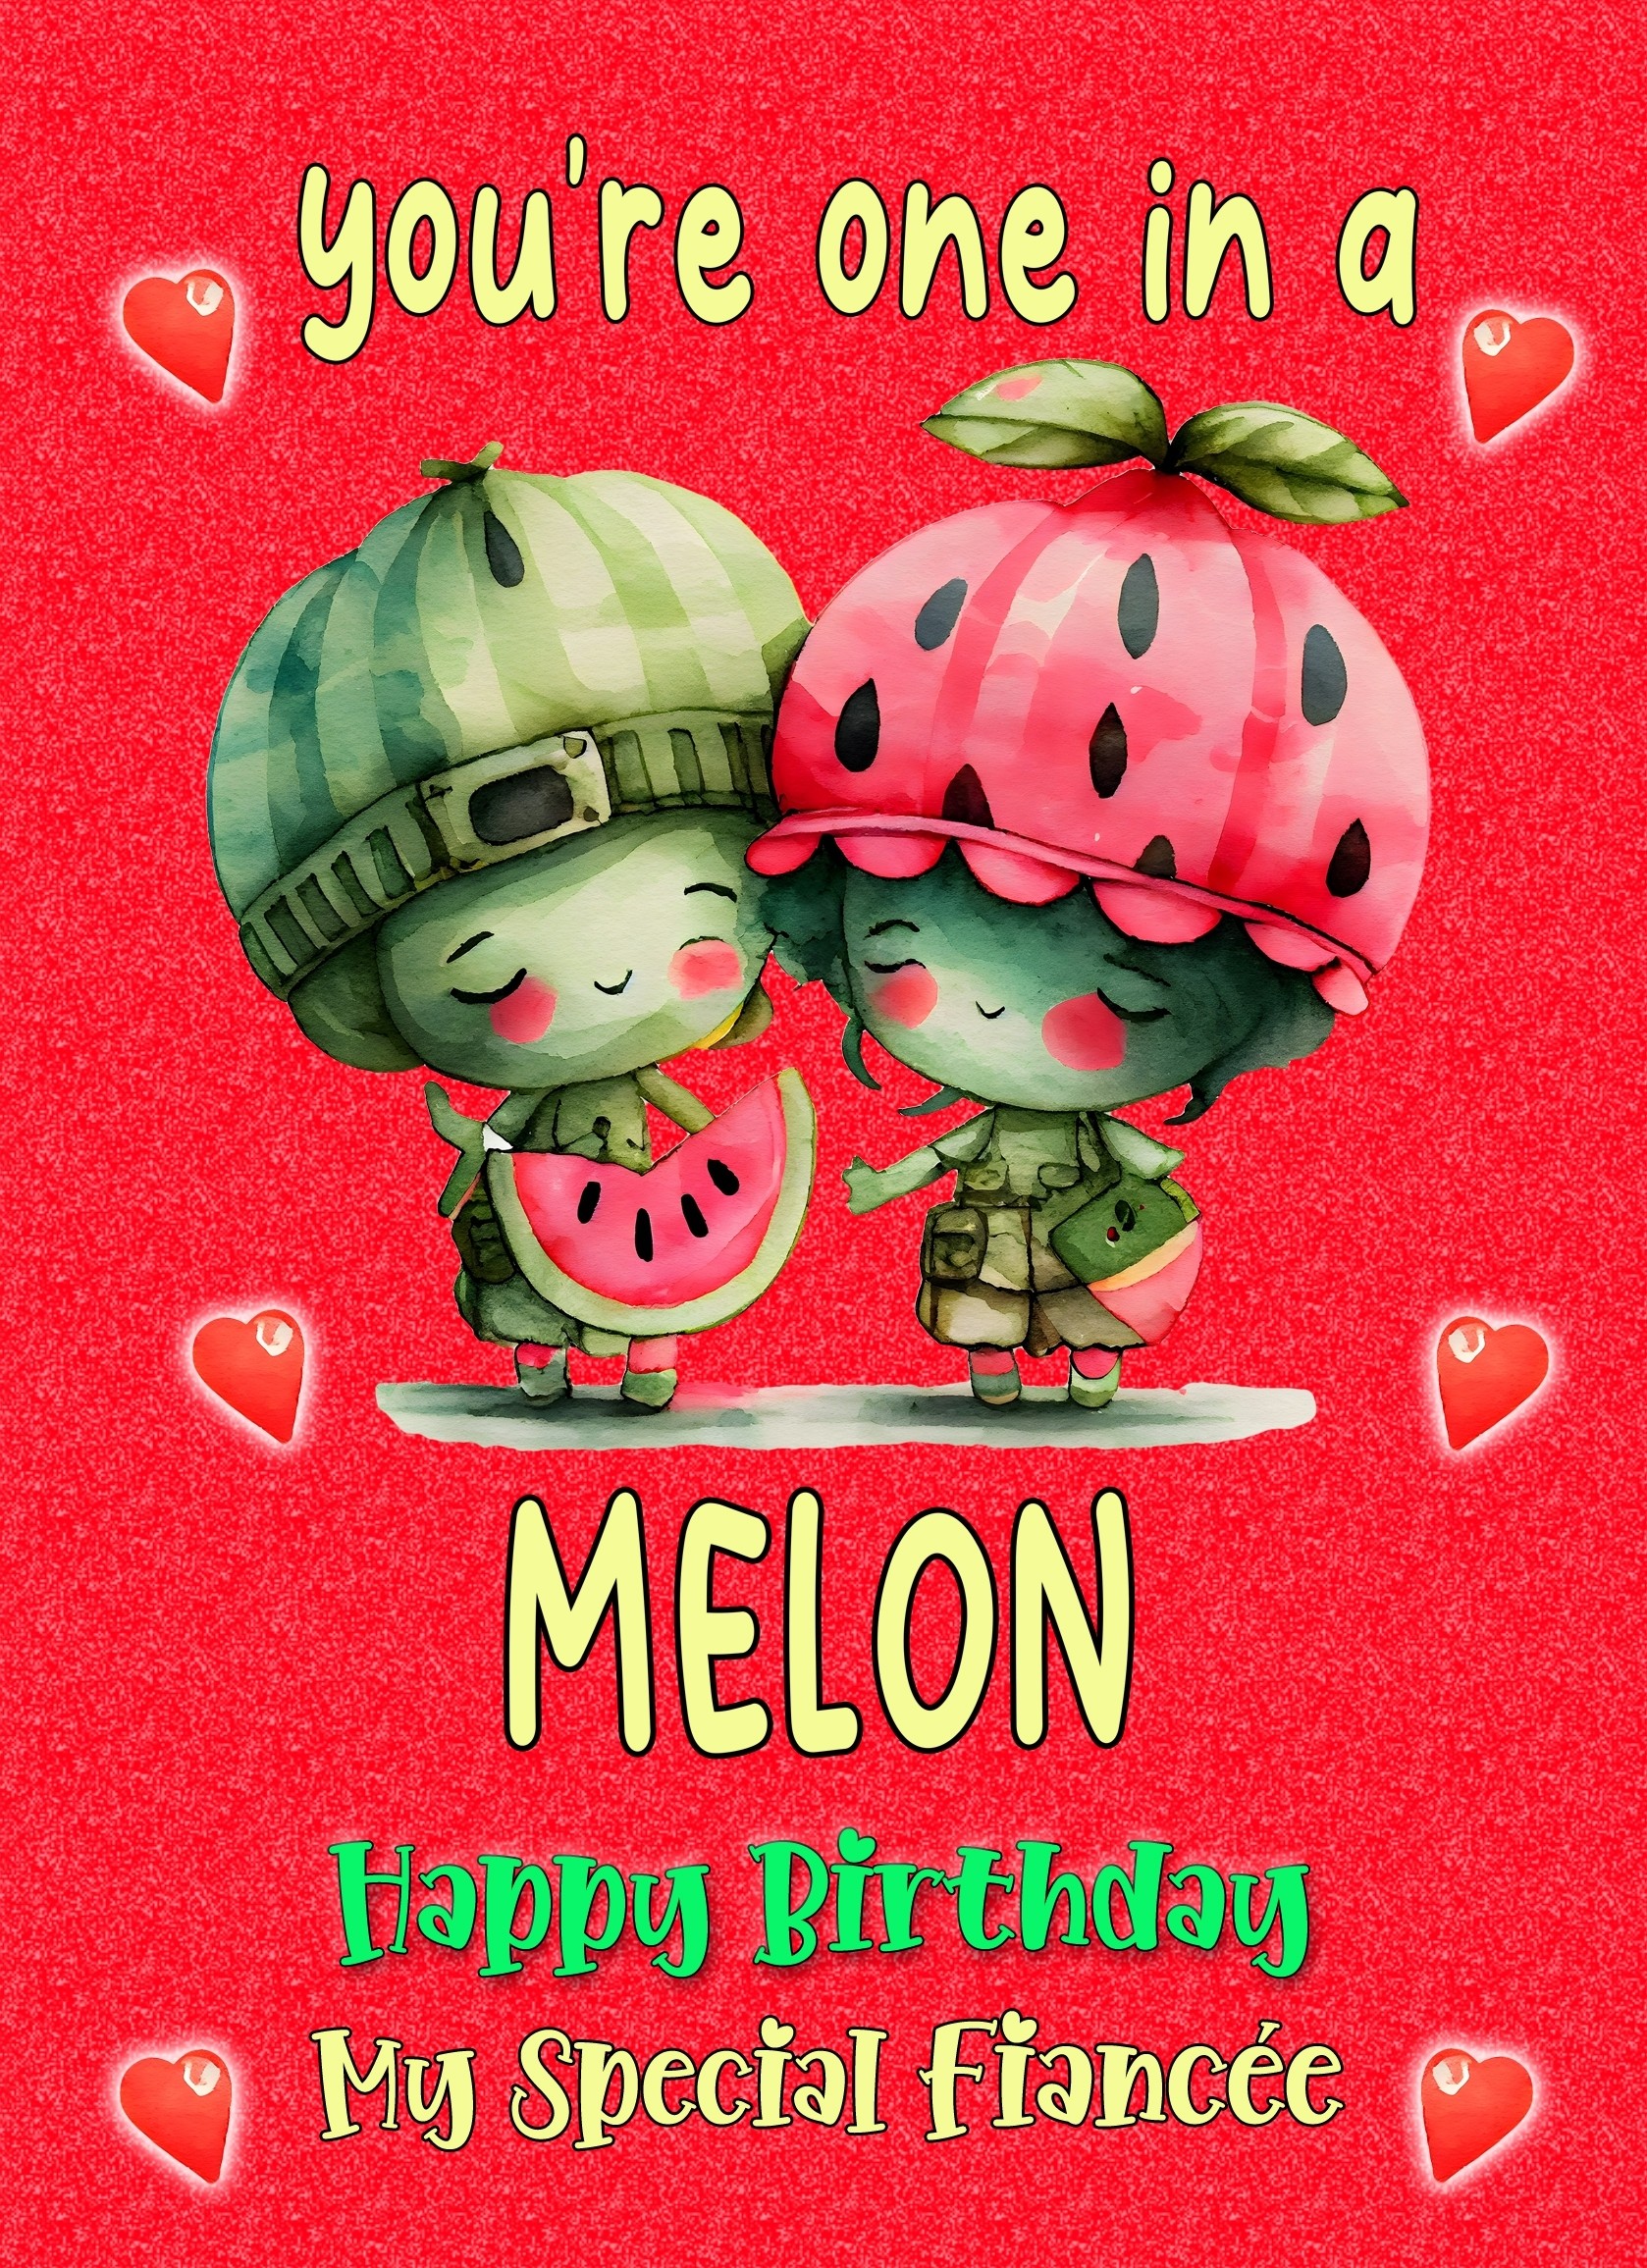 Funny Pun Romantic Birthday Card for Fiancee (One in a Melon)